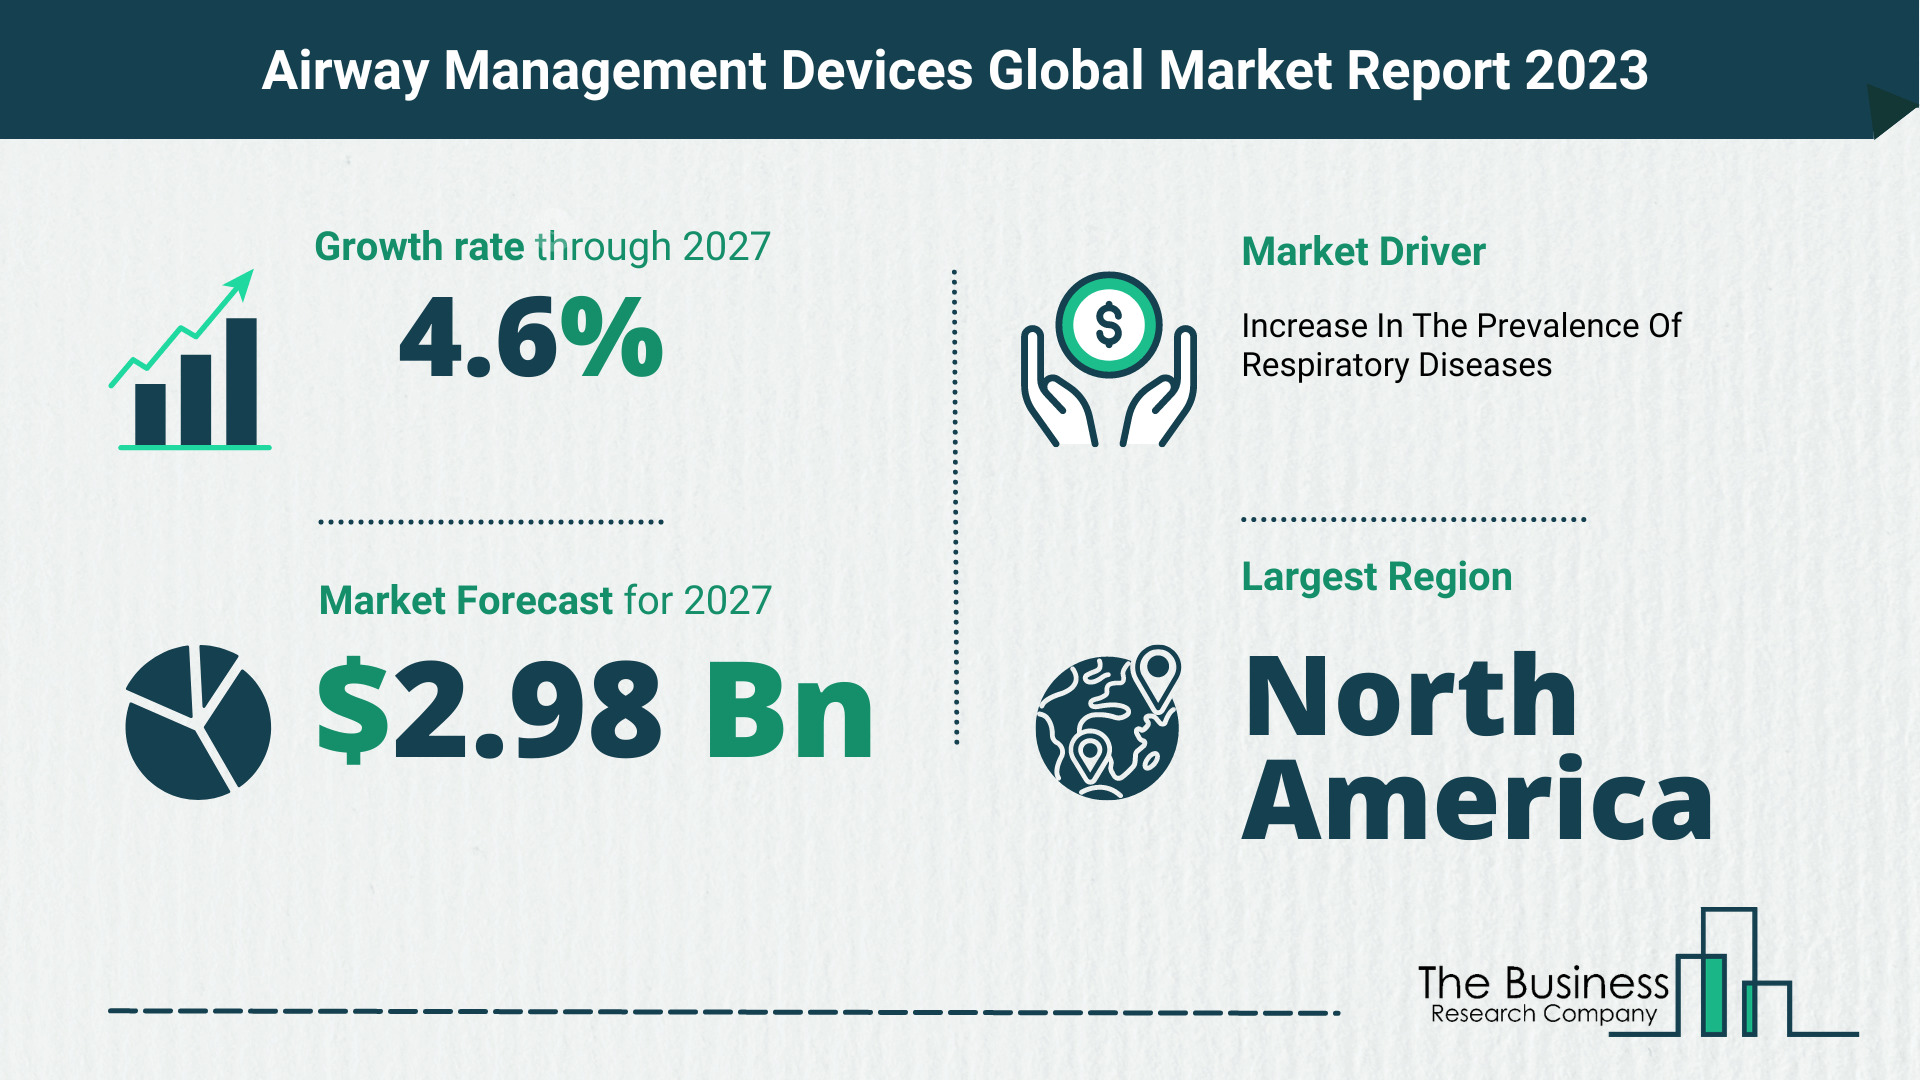 Global Airway Management Devices Market